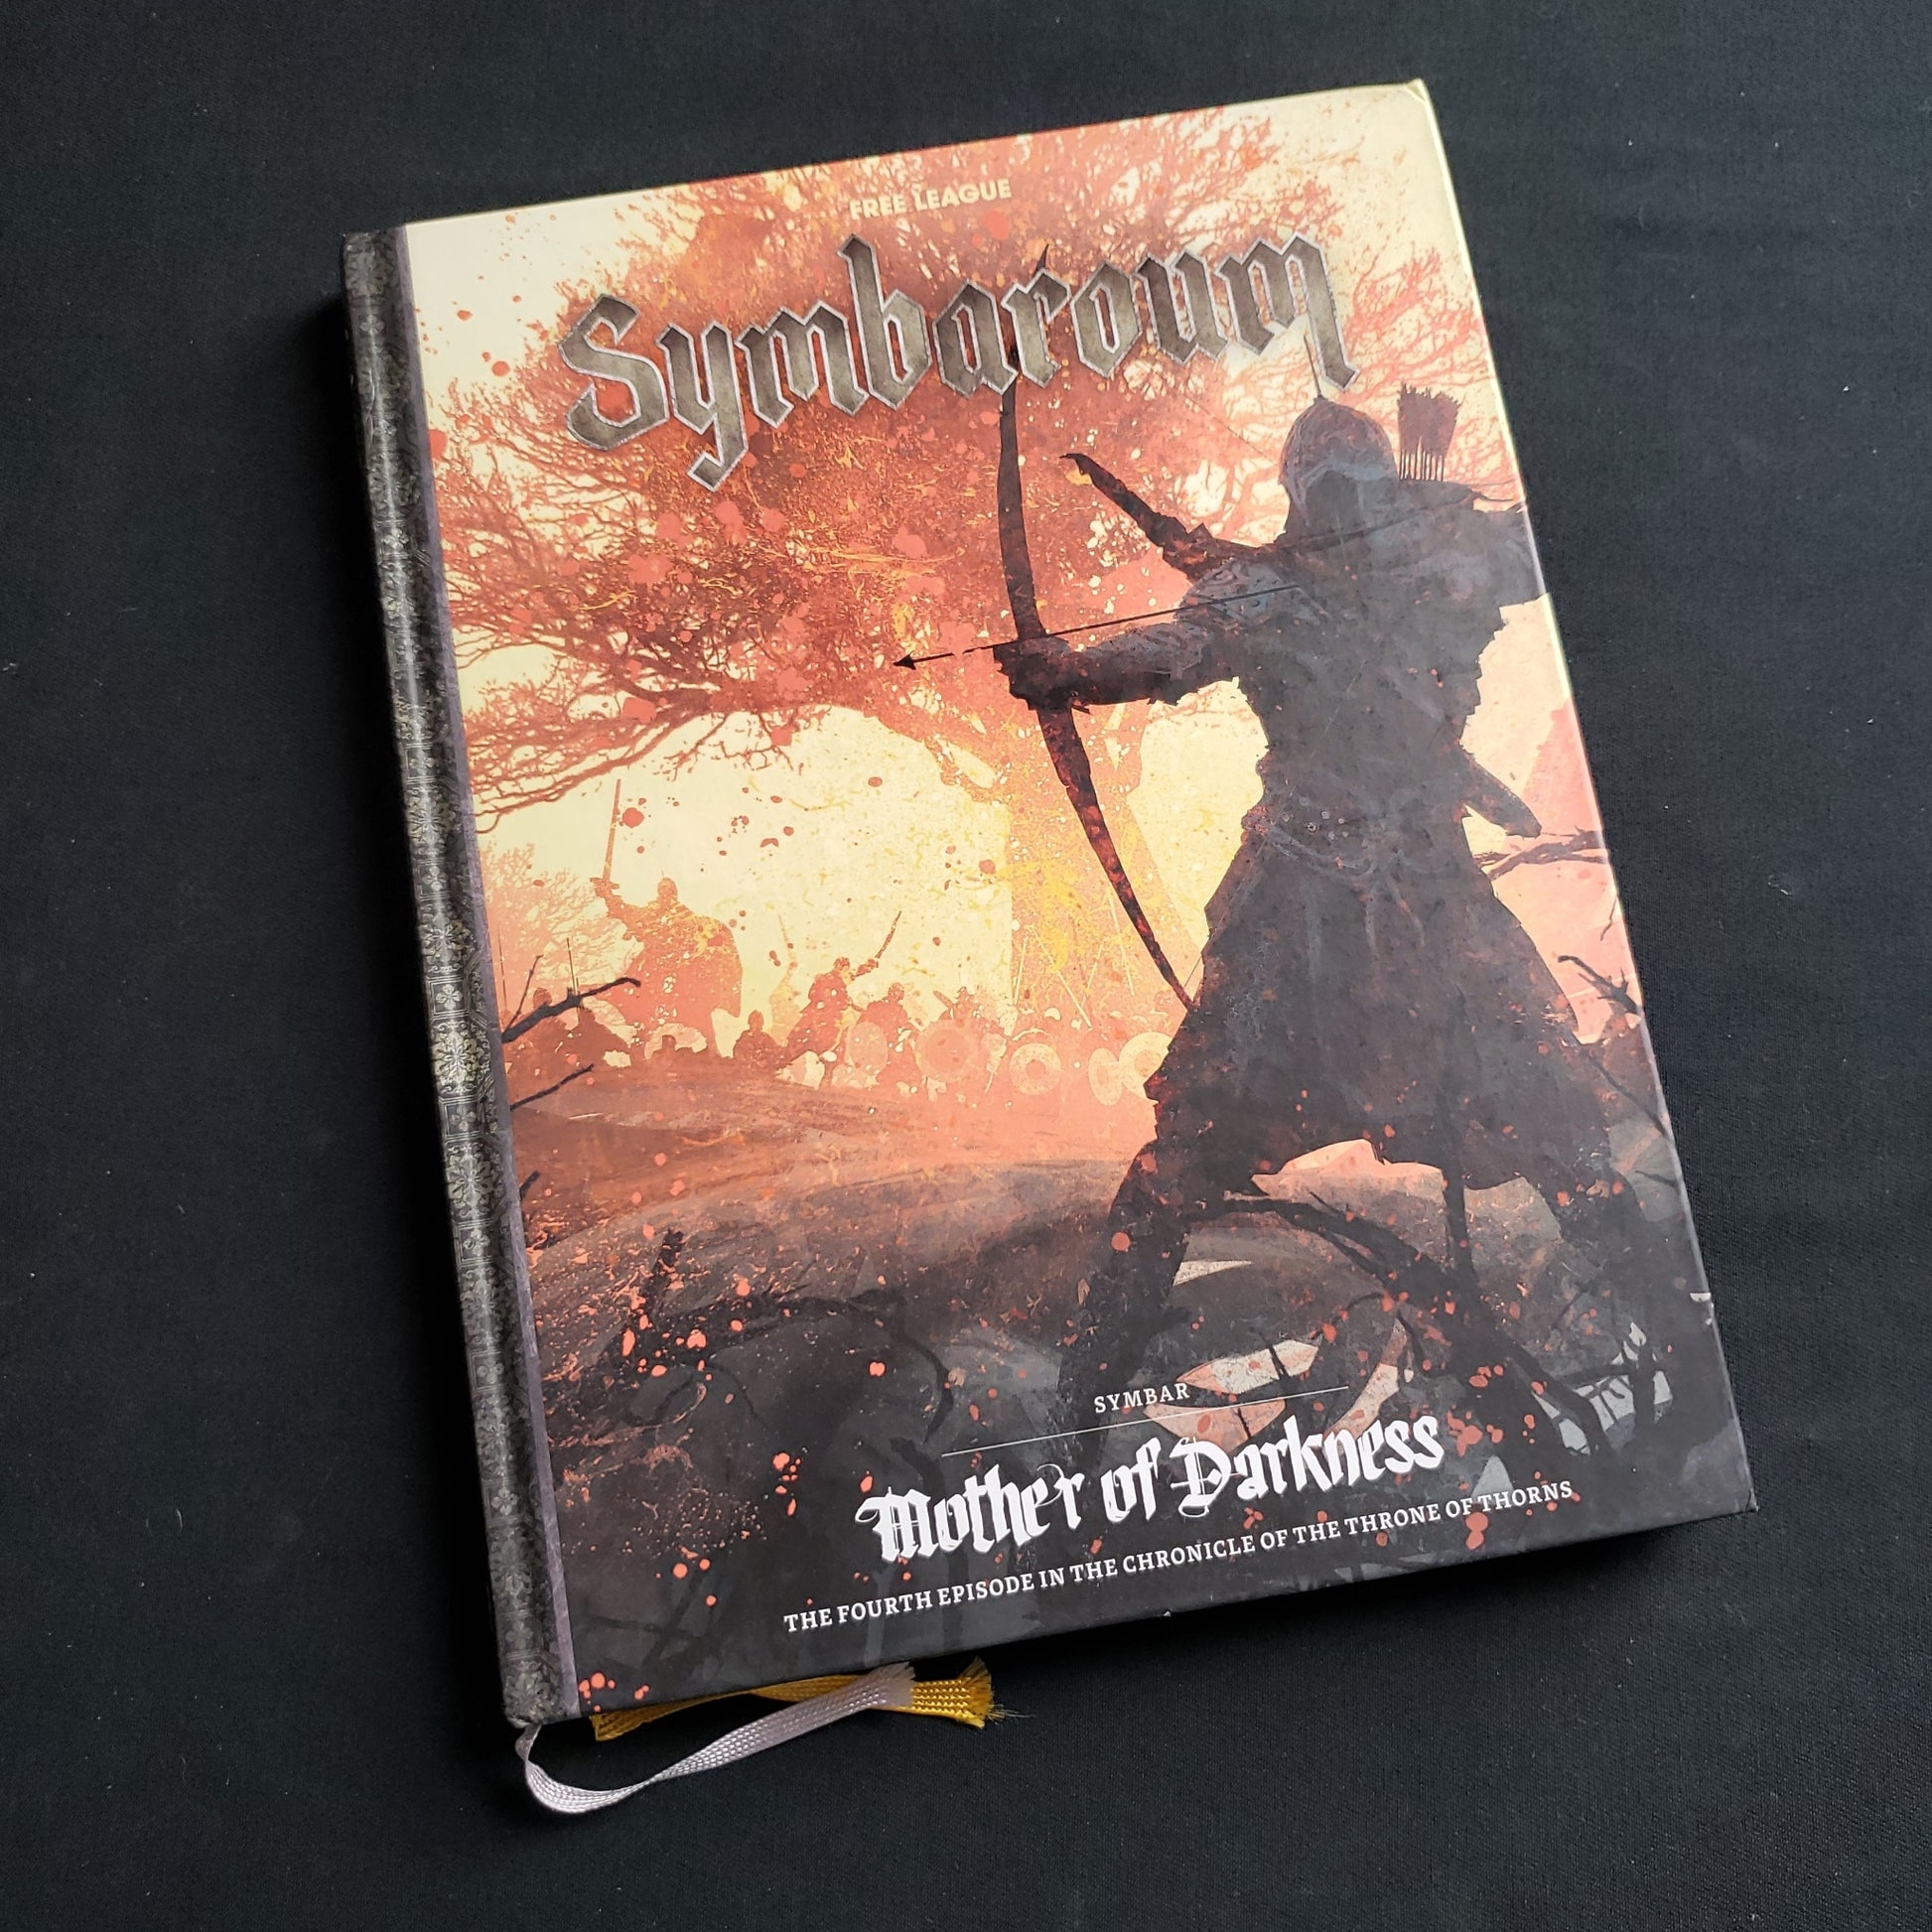 Image shows the front cover of the Symbar: Mother of Darkness book for the Symbaroum roleplaying game